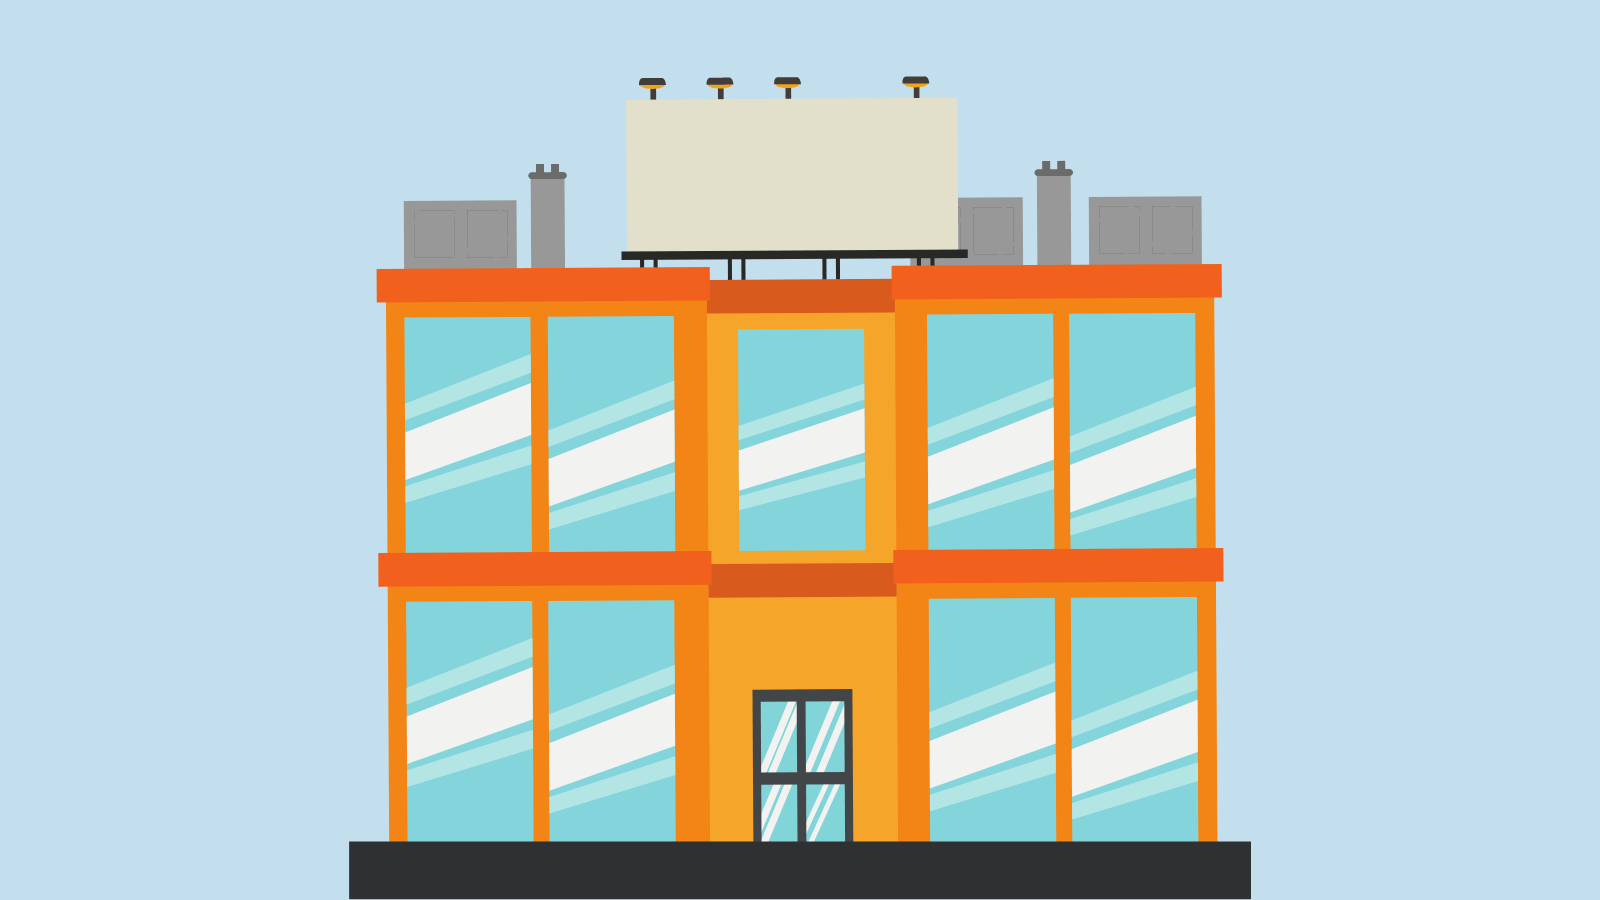 An illustration of a modern office building